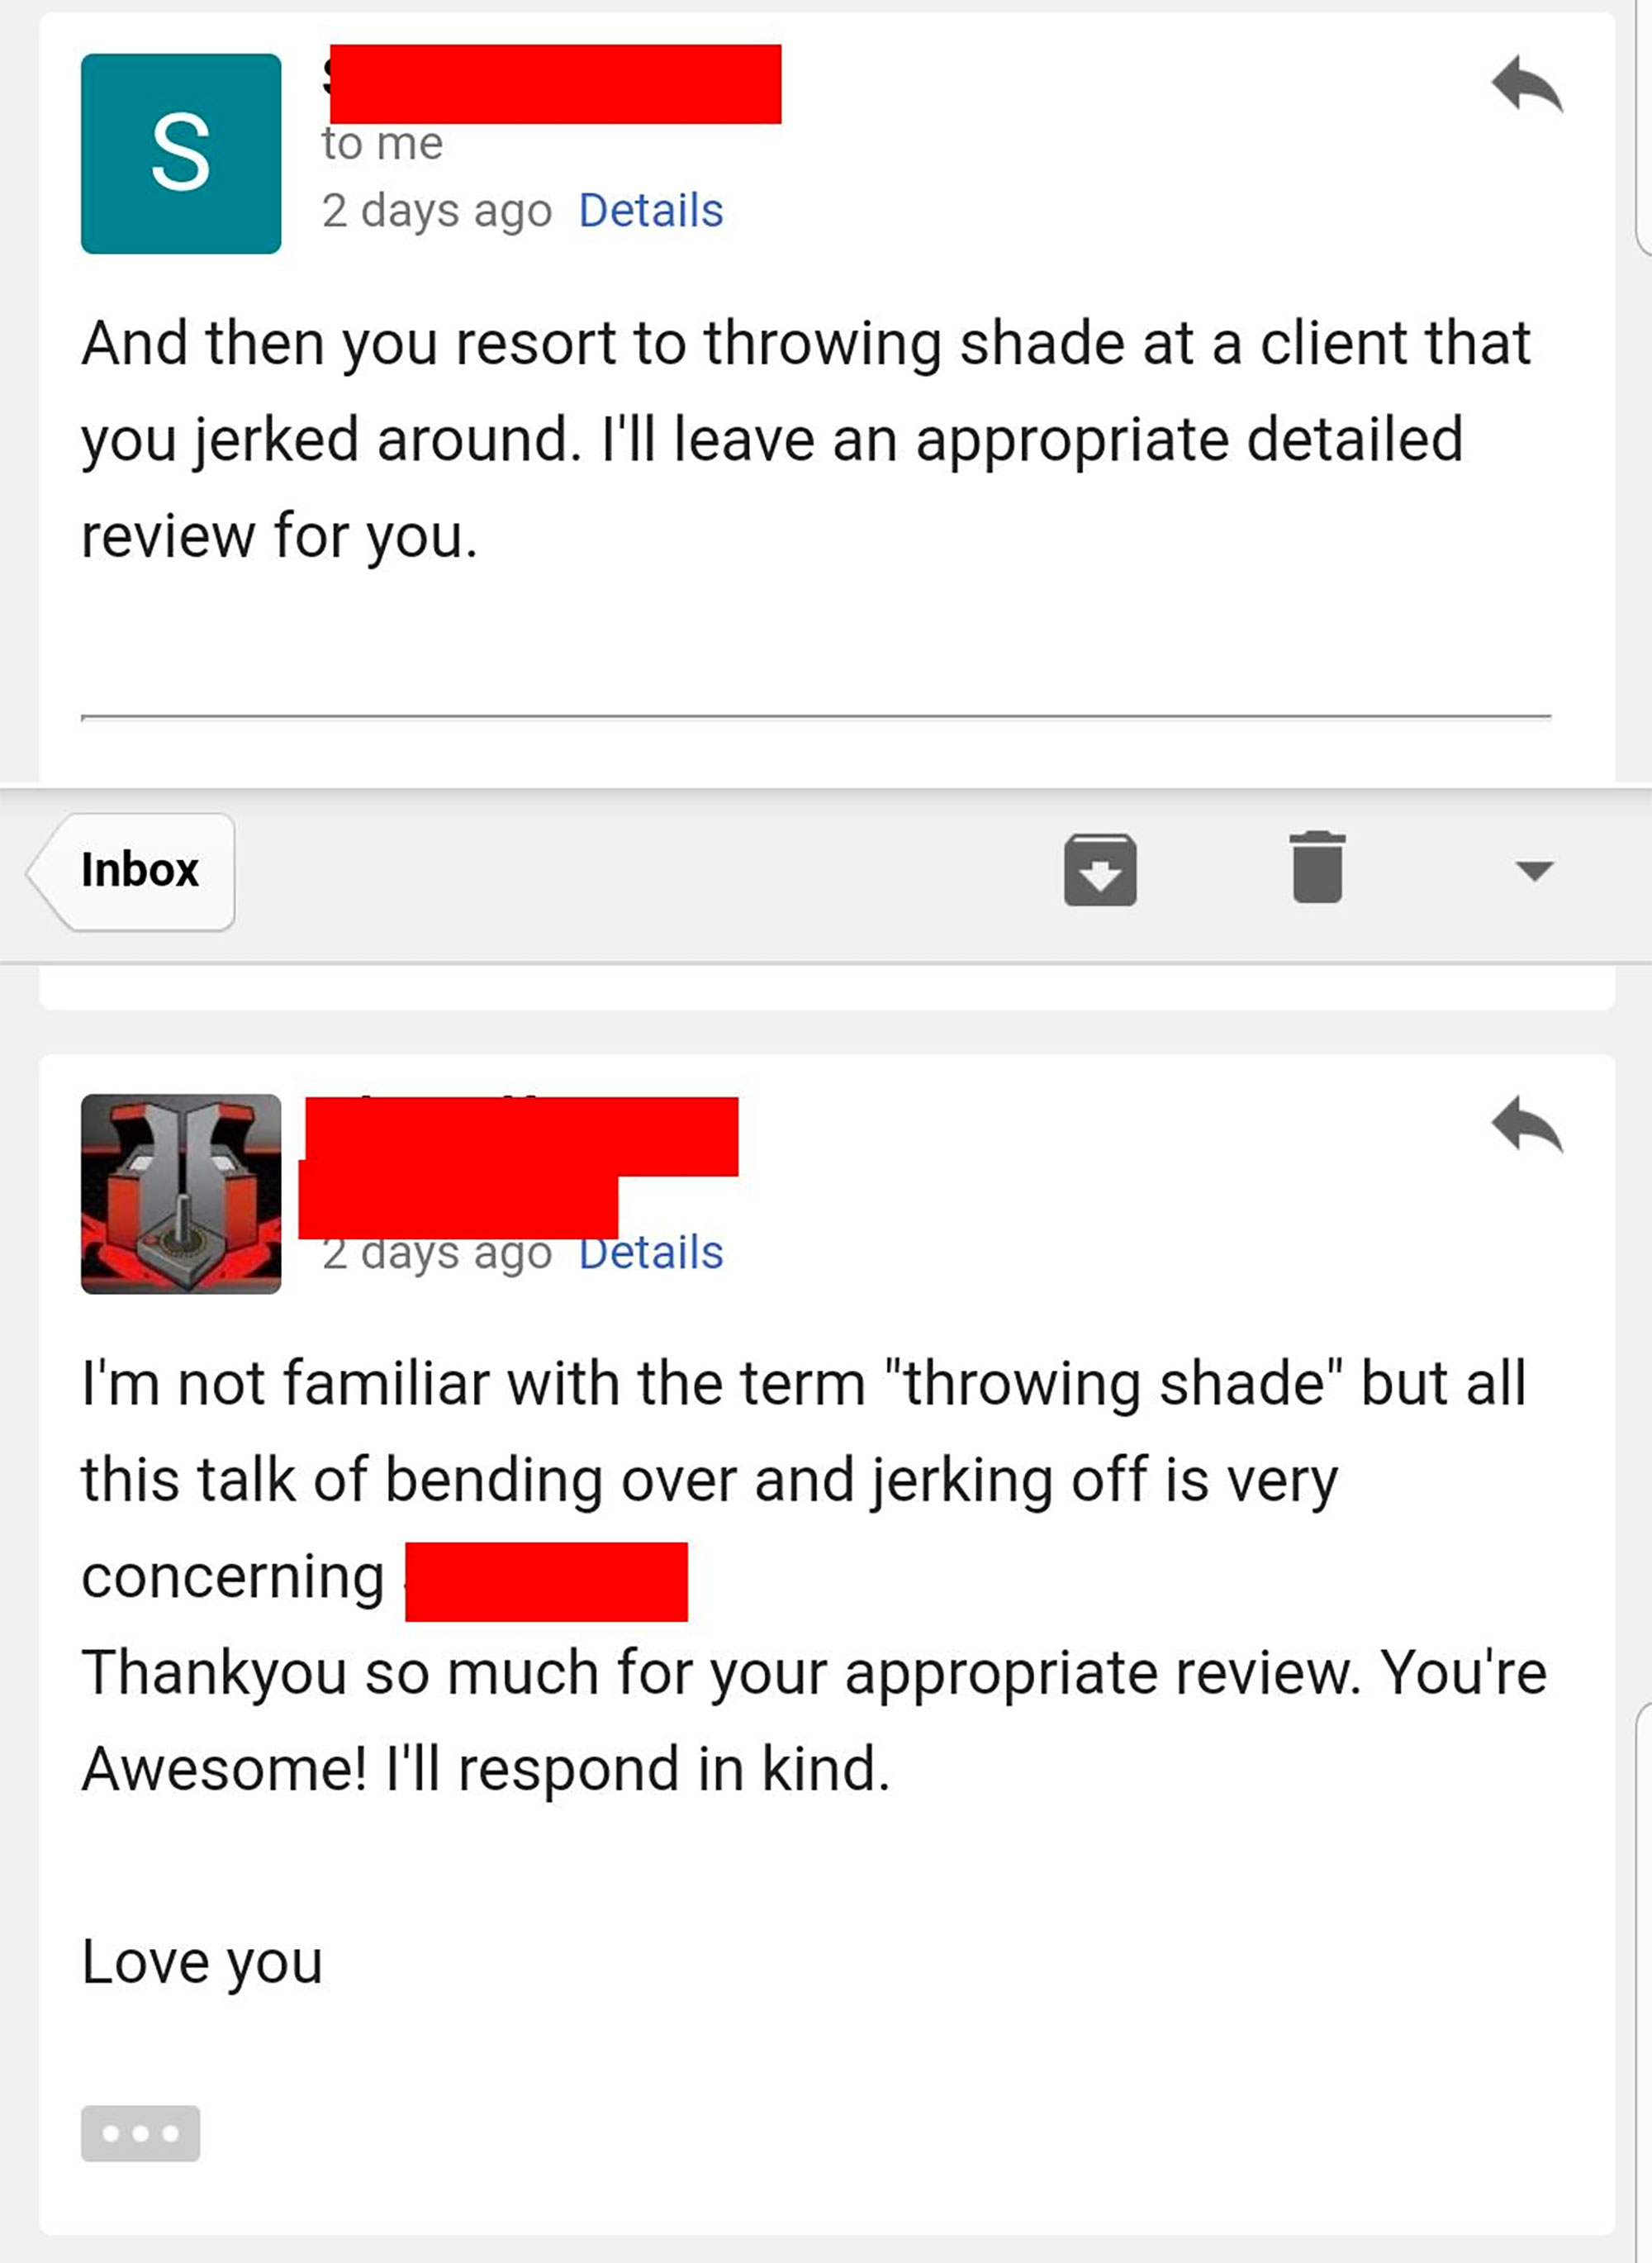 web page - to me 2 days ago Details And then you resort to throwing shade at a client that you jerked around. I'll leave an appropriate detailed review for you. Inbox 2 days ago Details I'm not familiar with the term "throwing shade" but all this talk of 